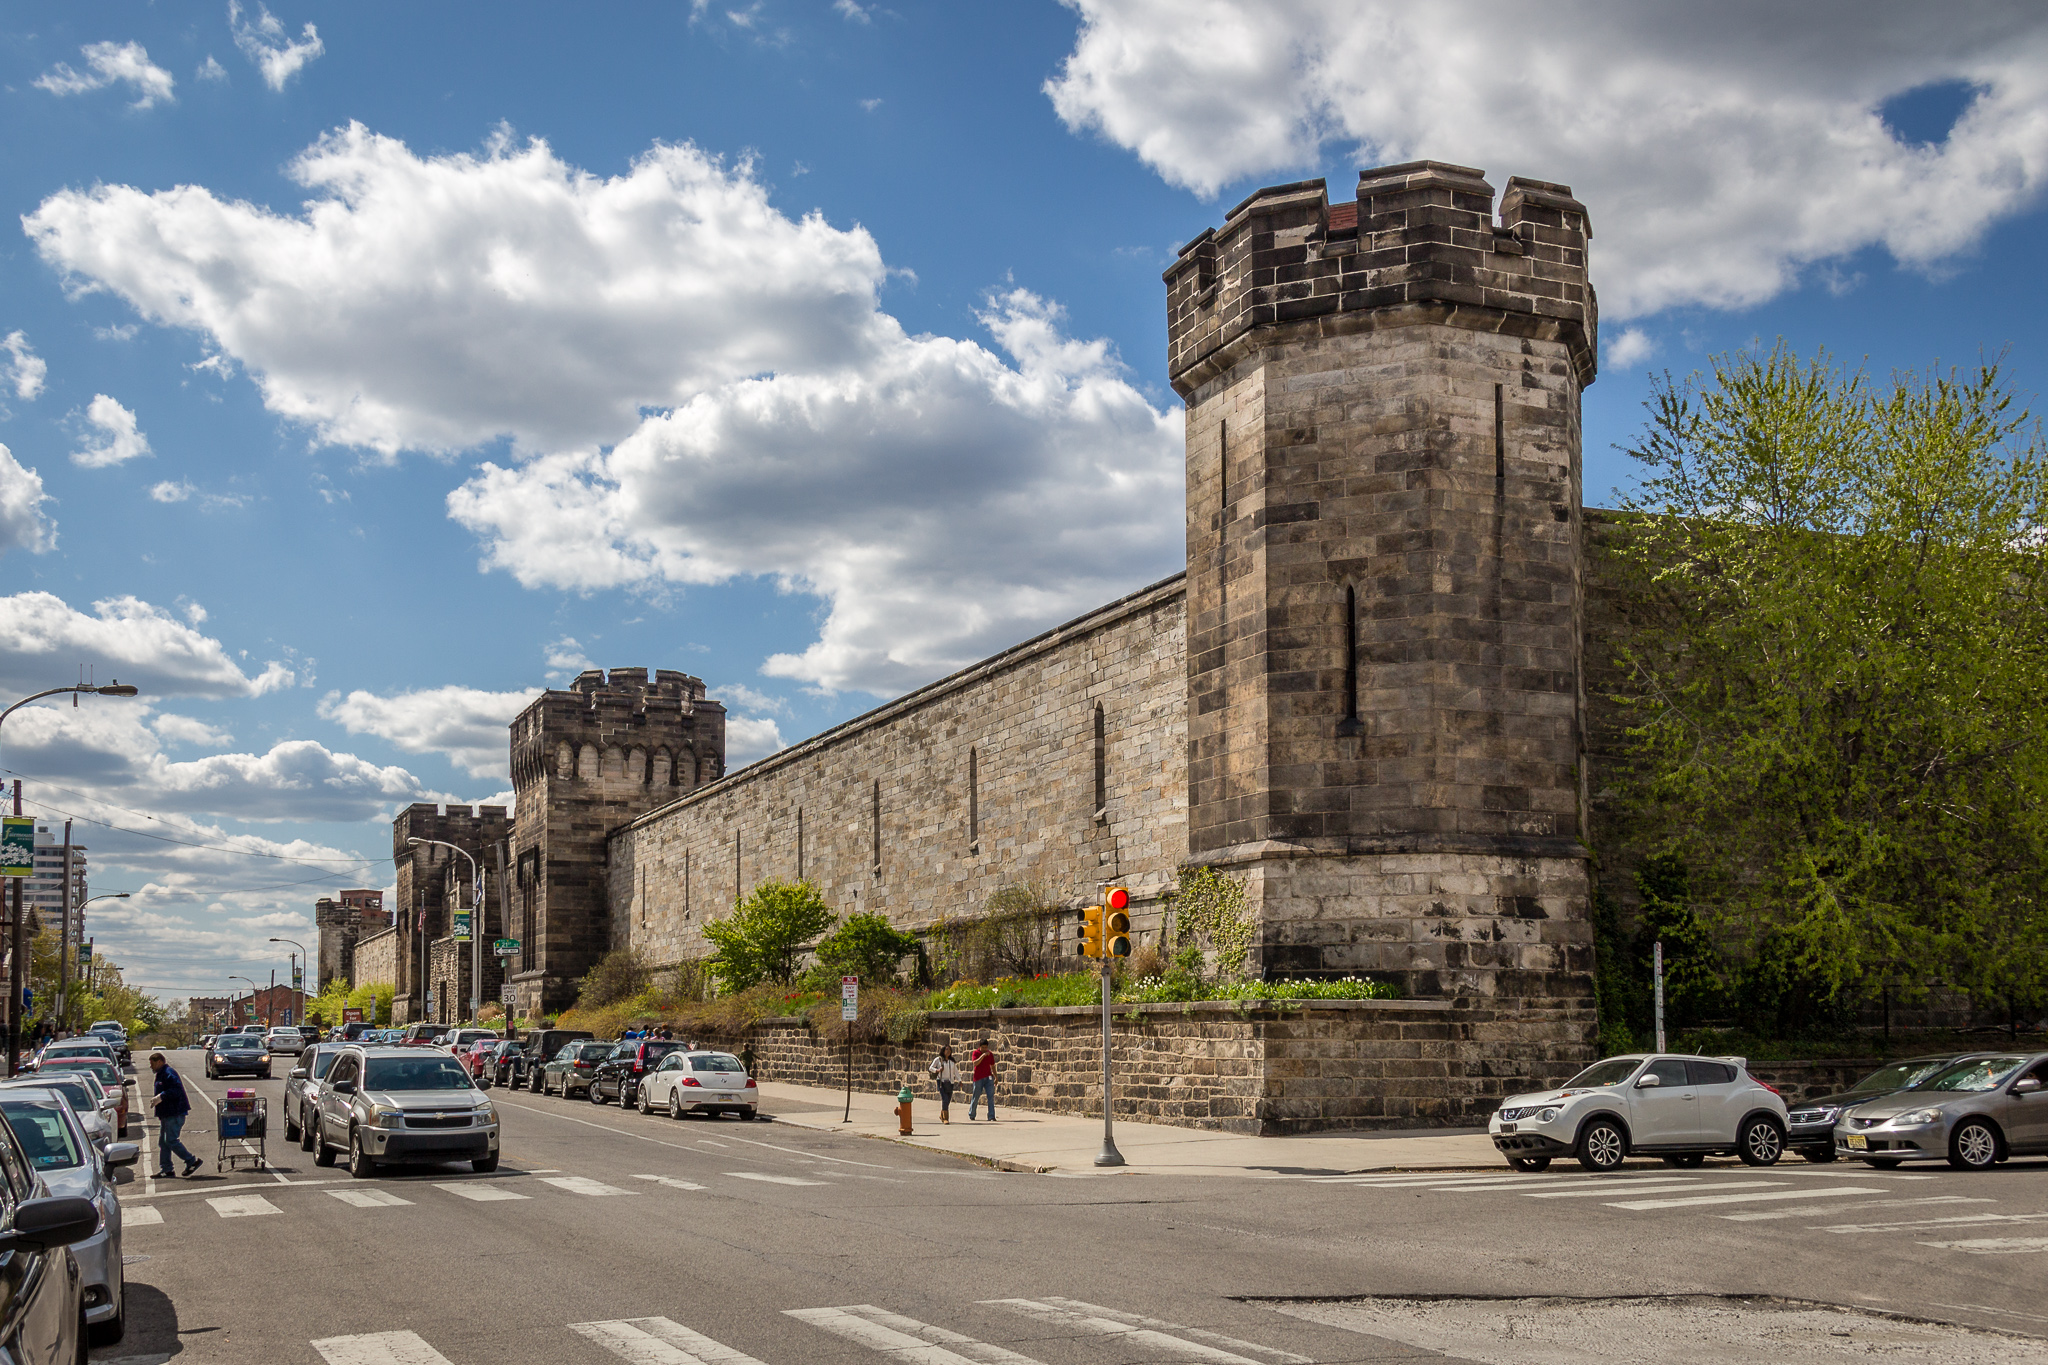 Eastern State Penitentiary